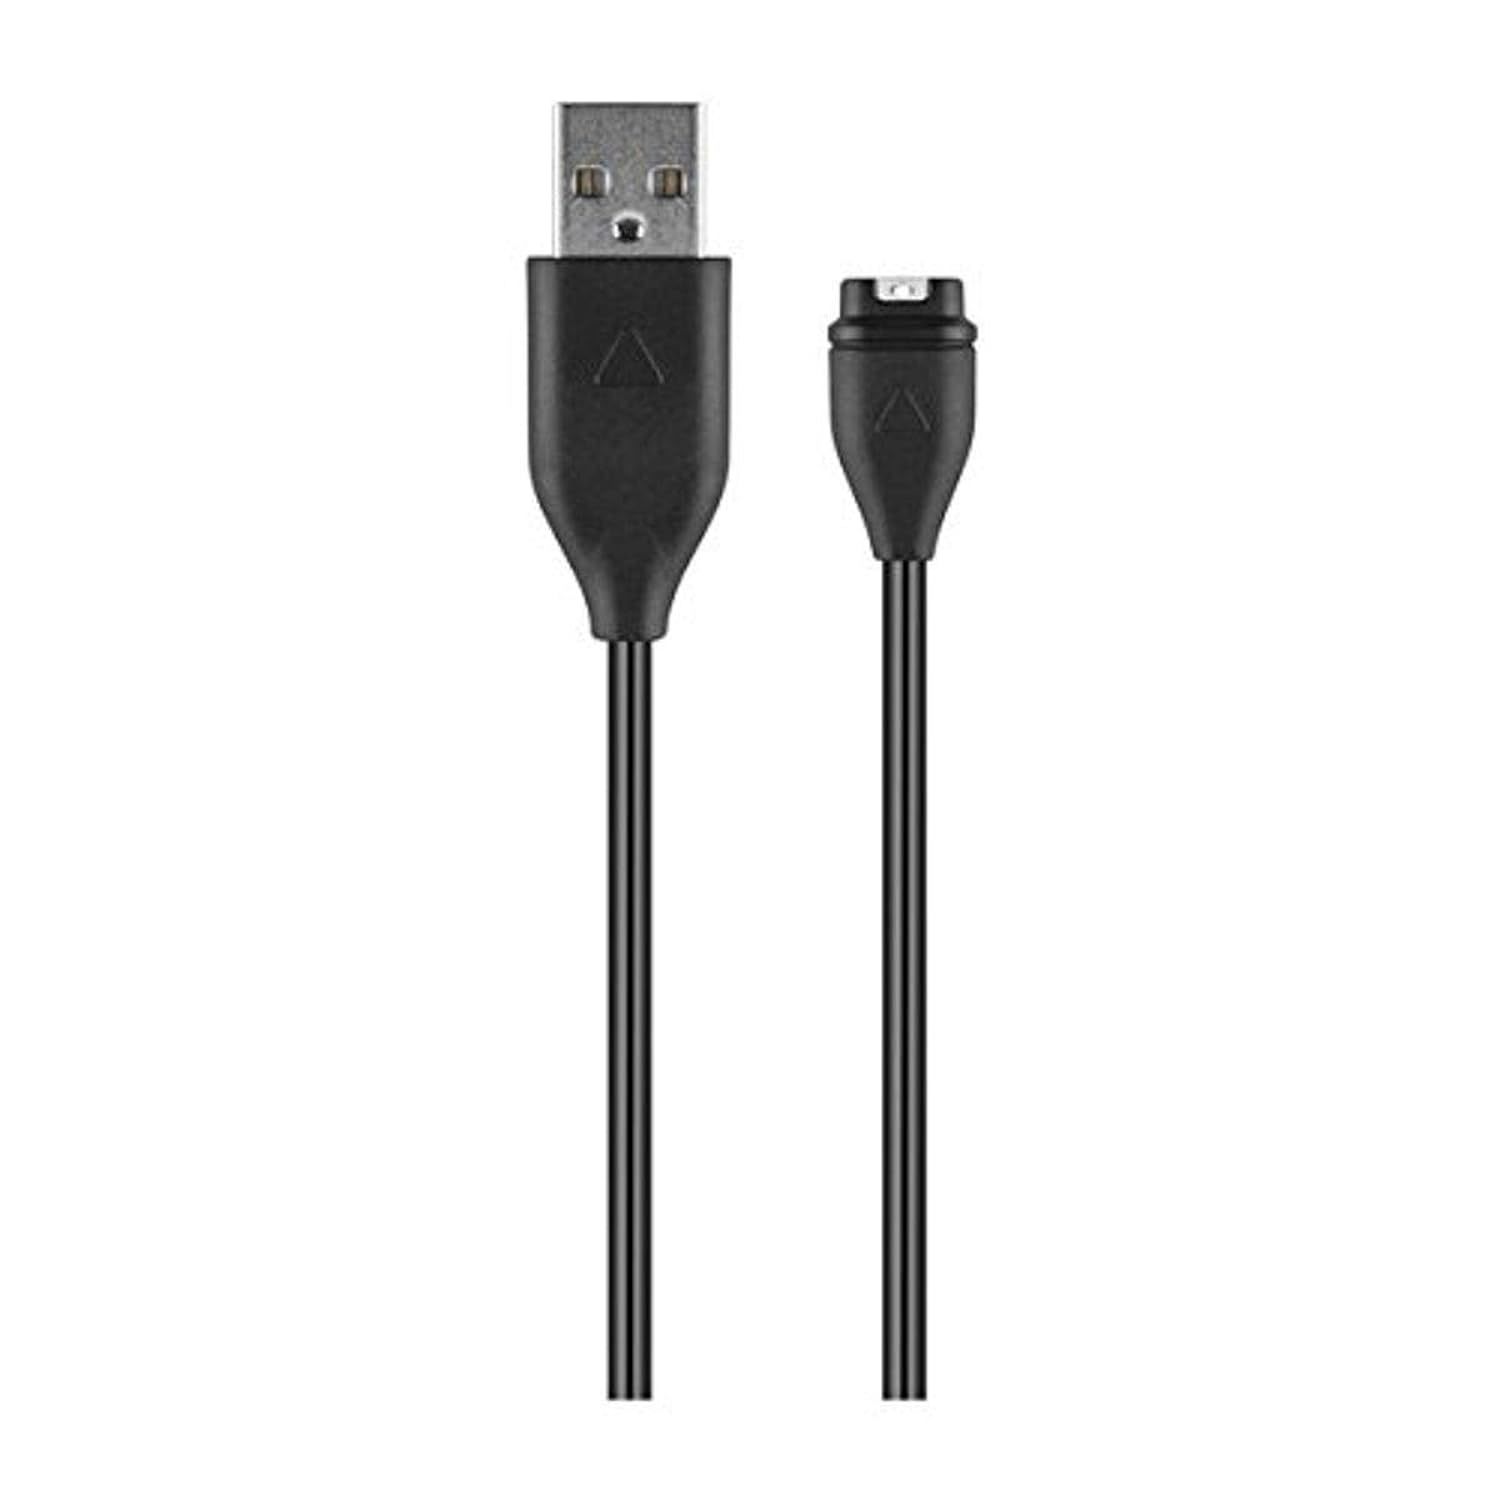 Primary image for Garmin Approach S62 Charging/Data Cable (1 Meter)